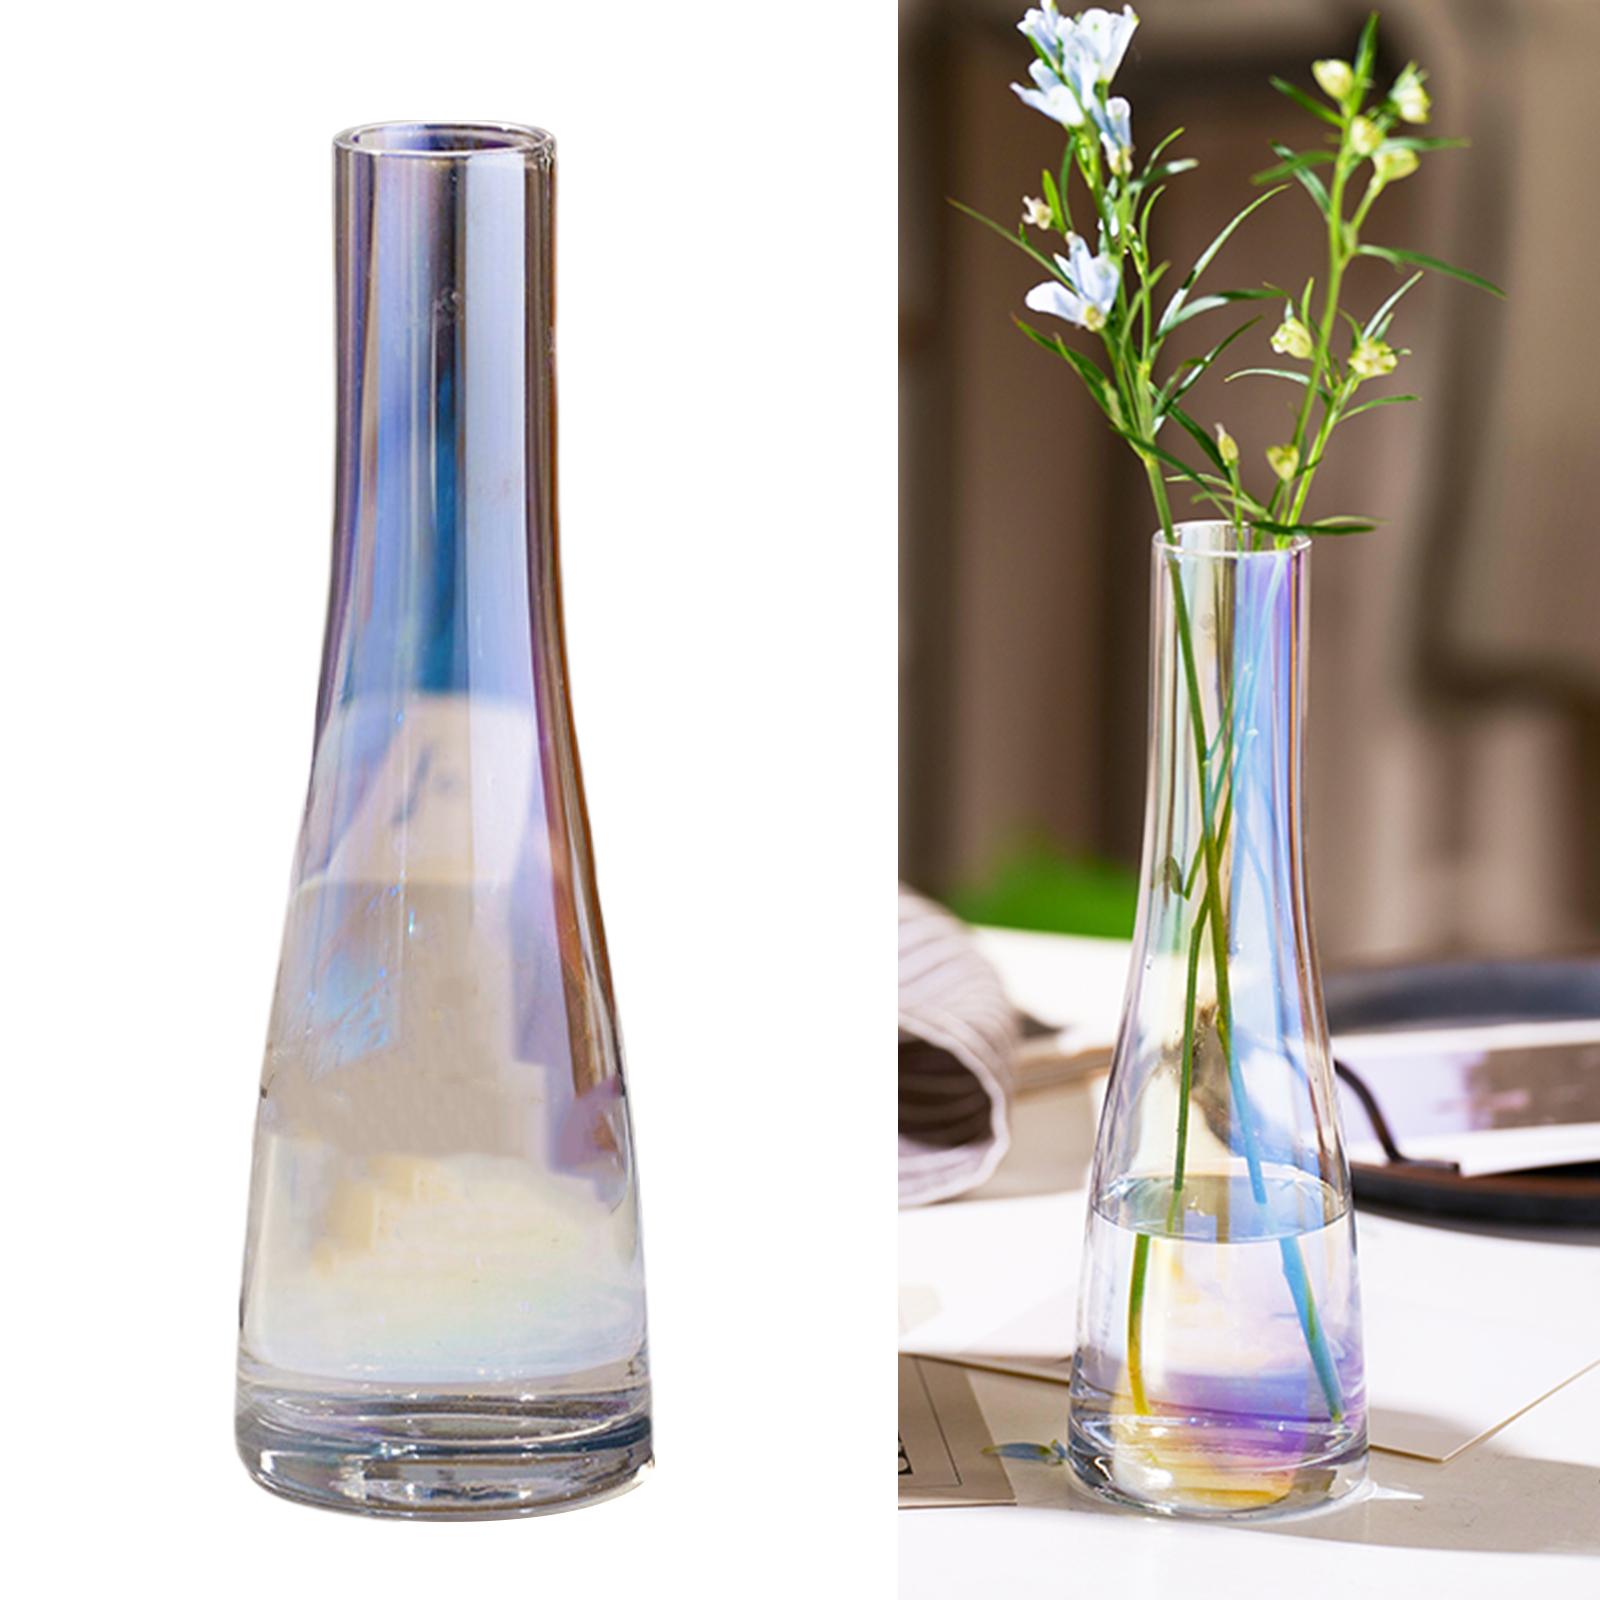 Glass Vases Decor Narrow Mouth Glass Vase for Bar Birthday Gift Drawing Room Colorful